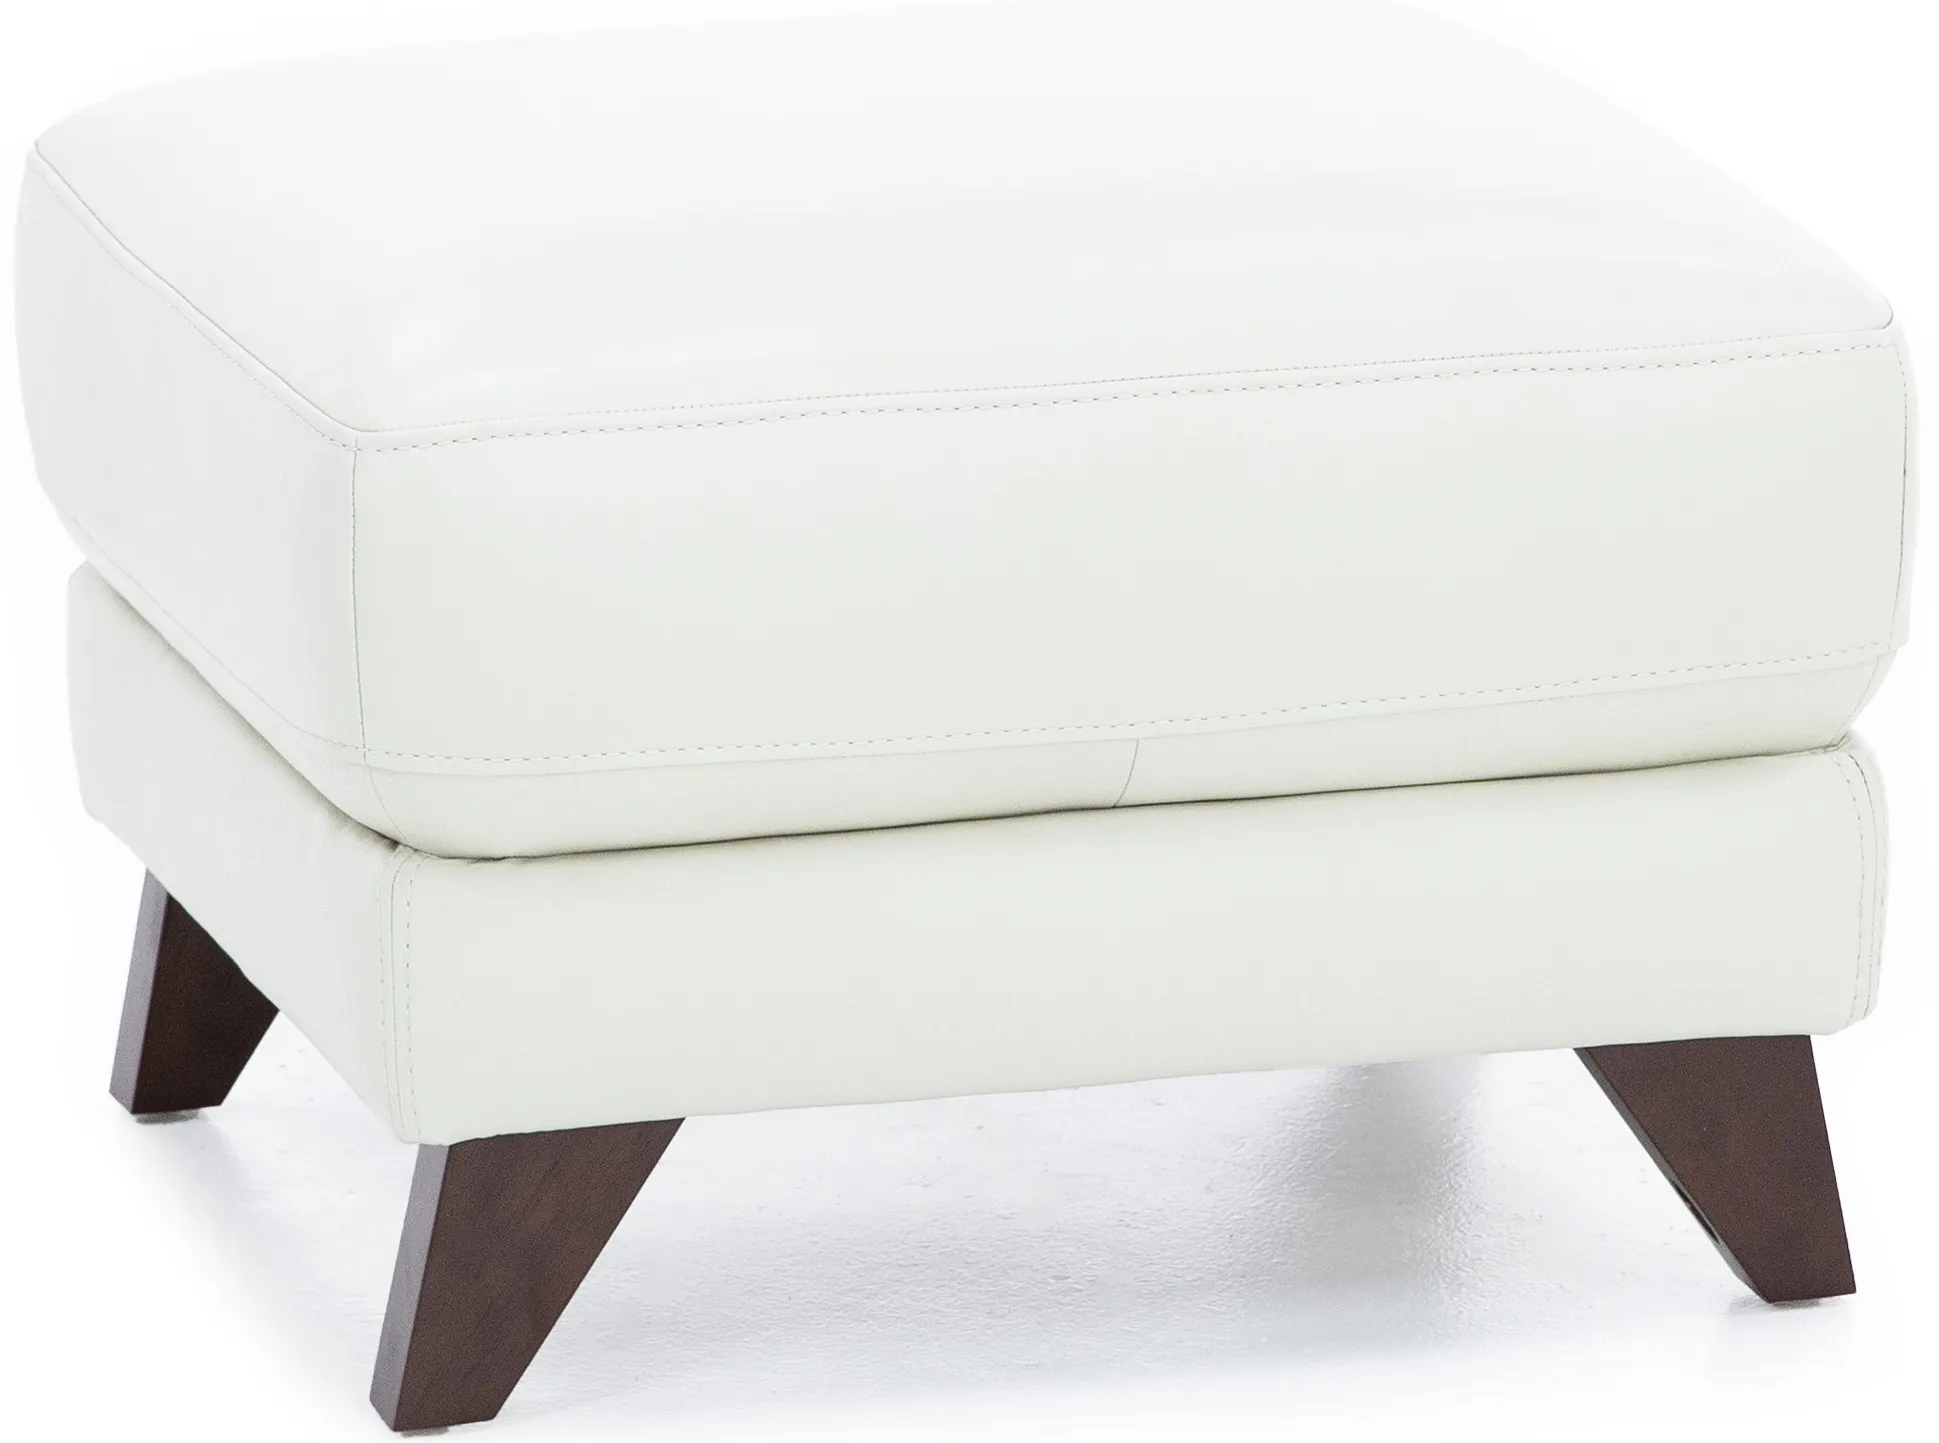 Paloma Leather Ottoman in Ice